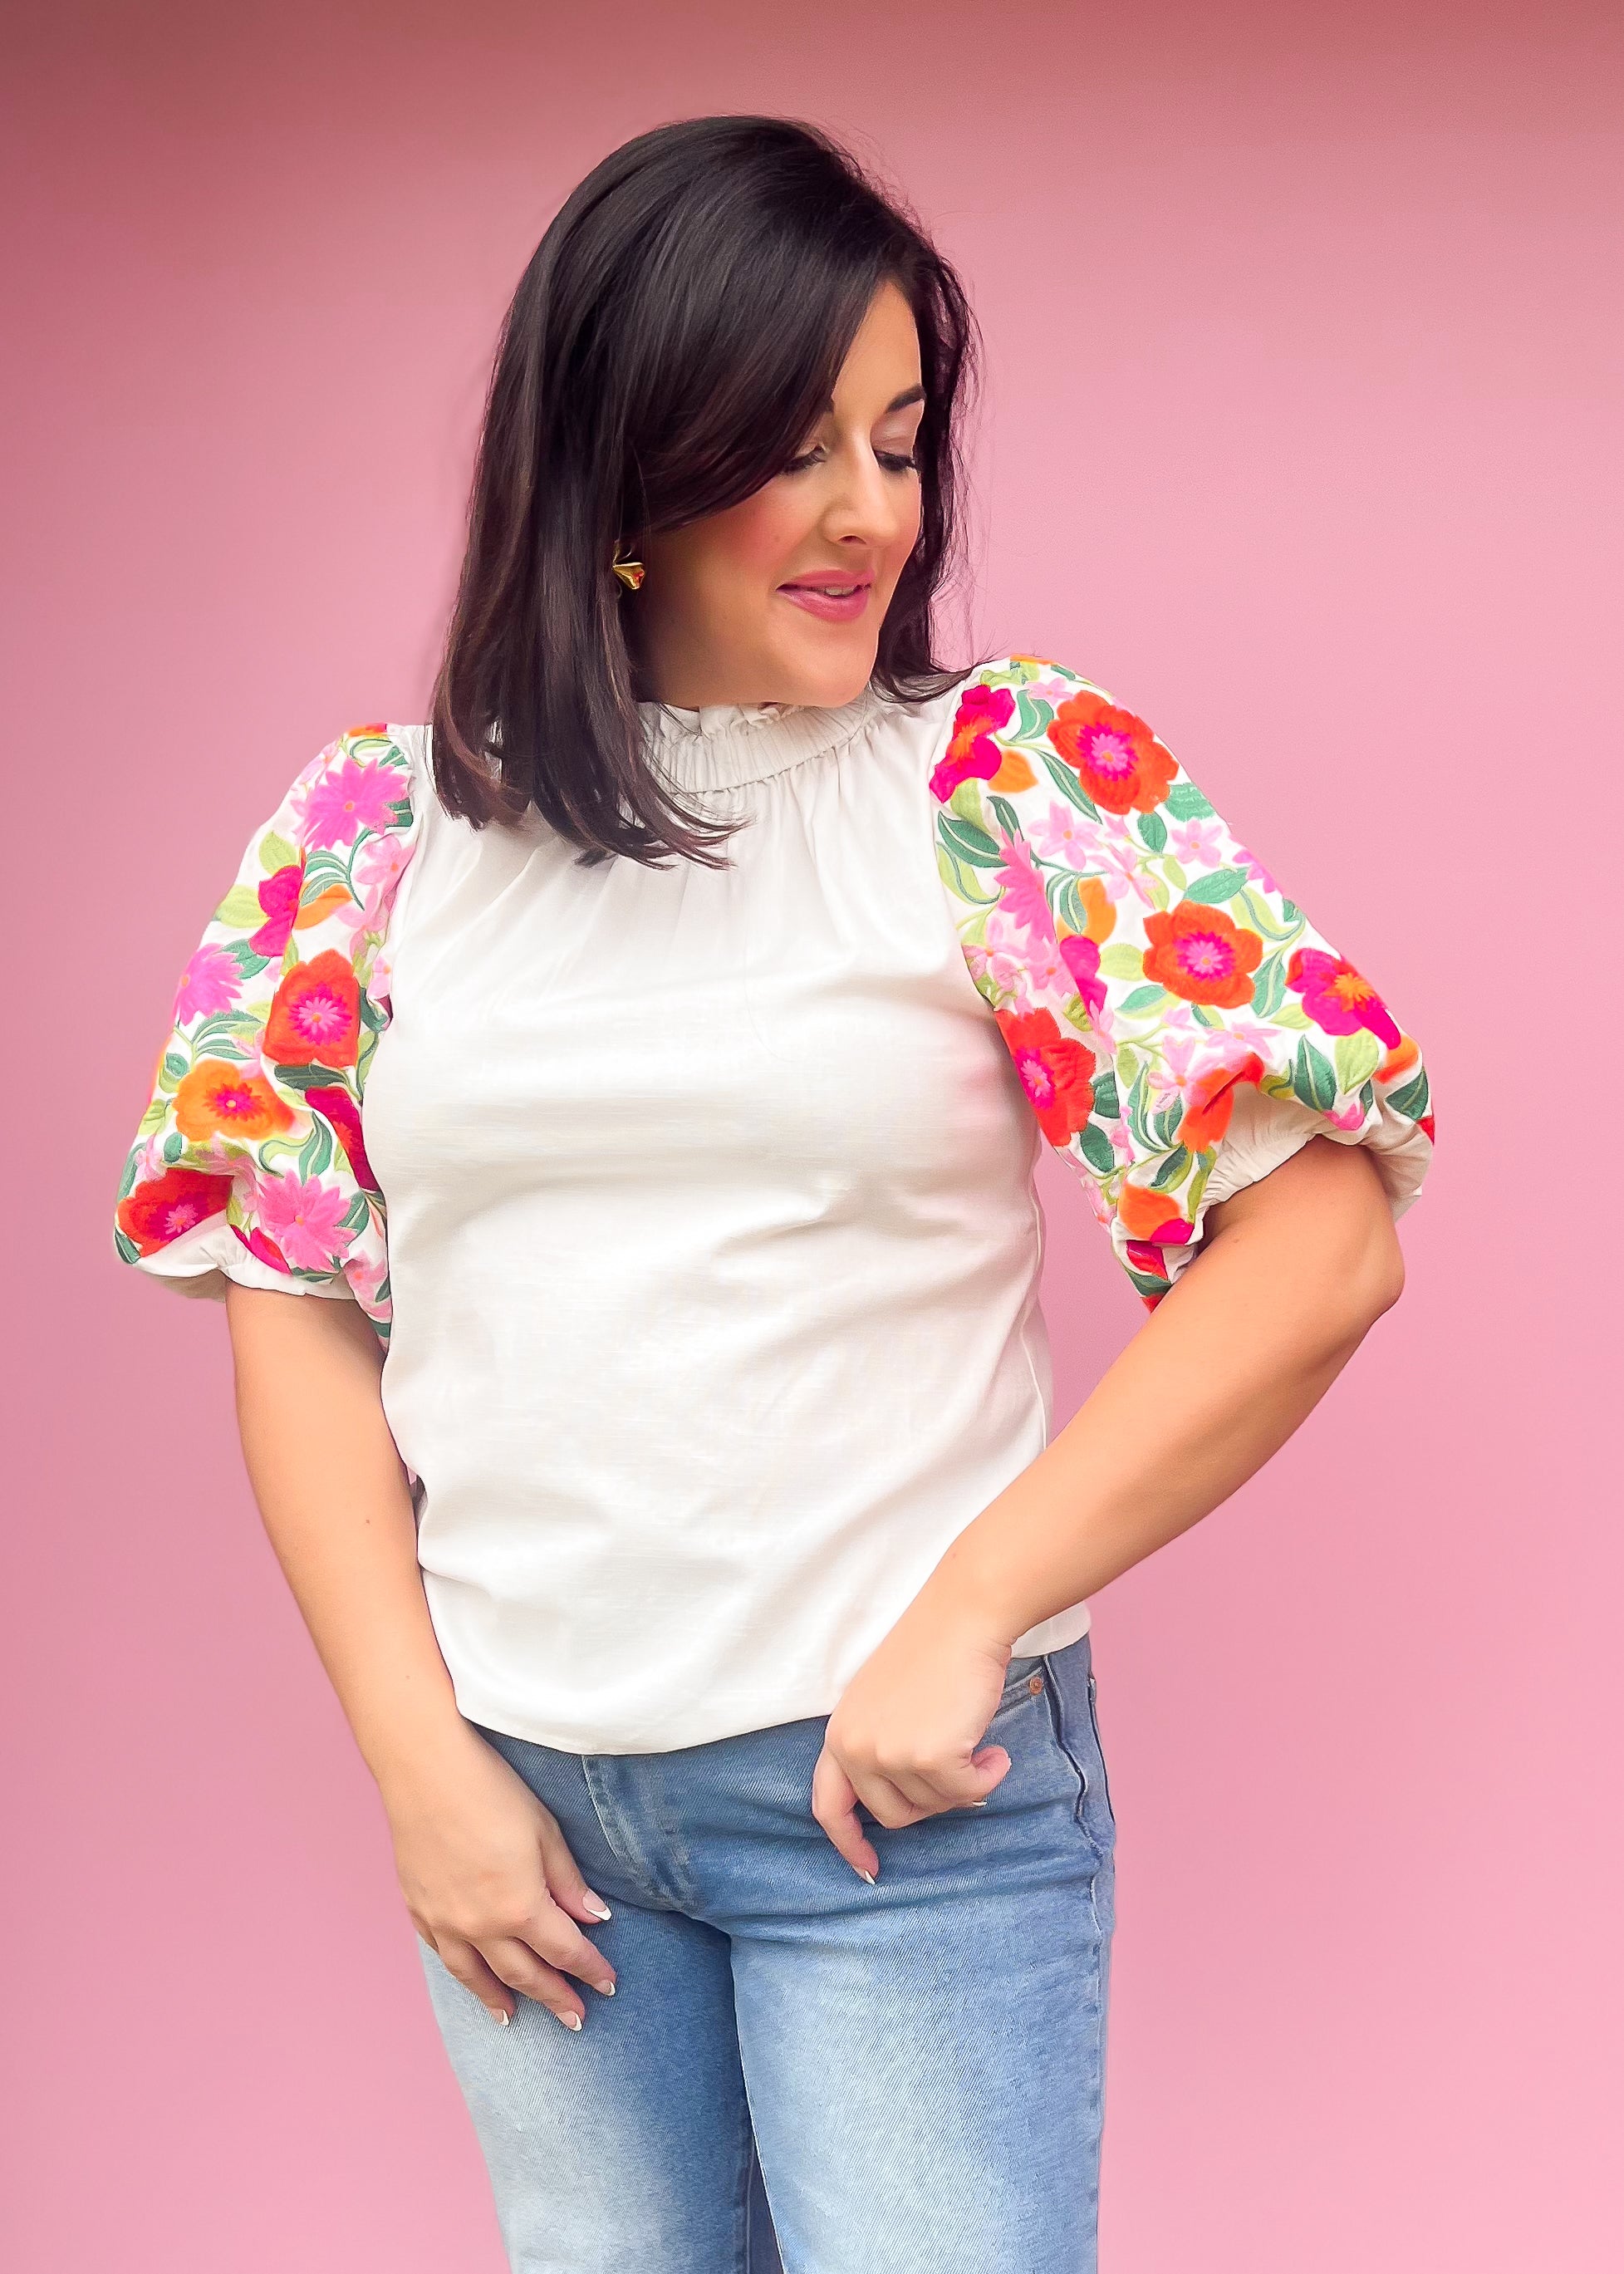 Islia Floral Embroidered Button Back Top